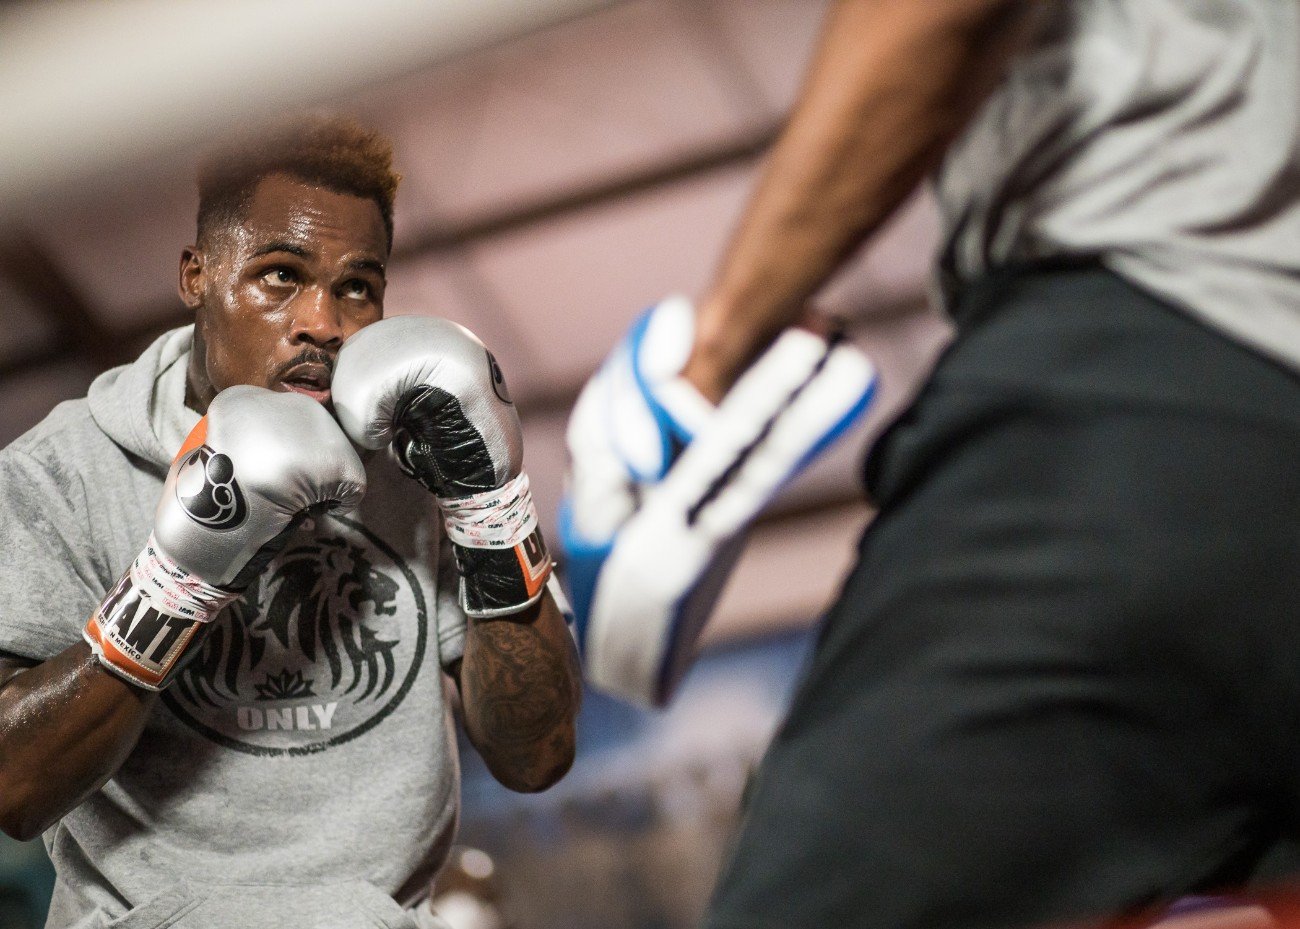 Image: Jermell Charlo challenges Canelo and Mayweather